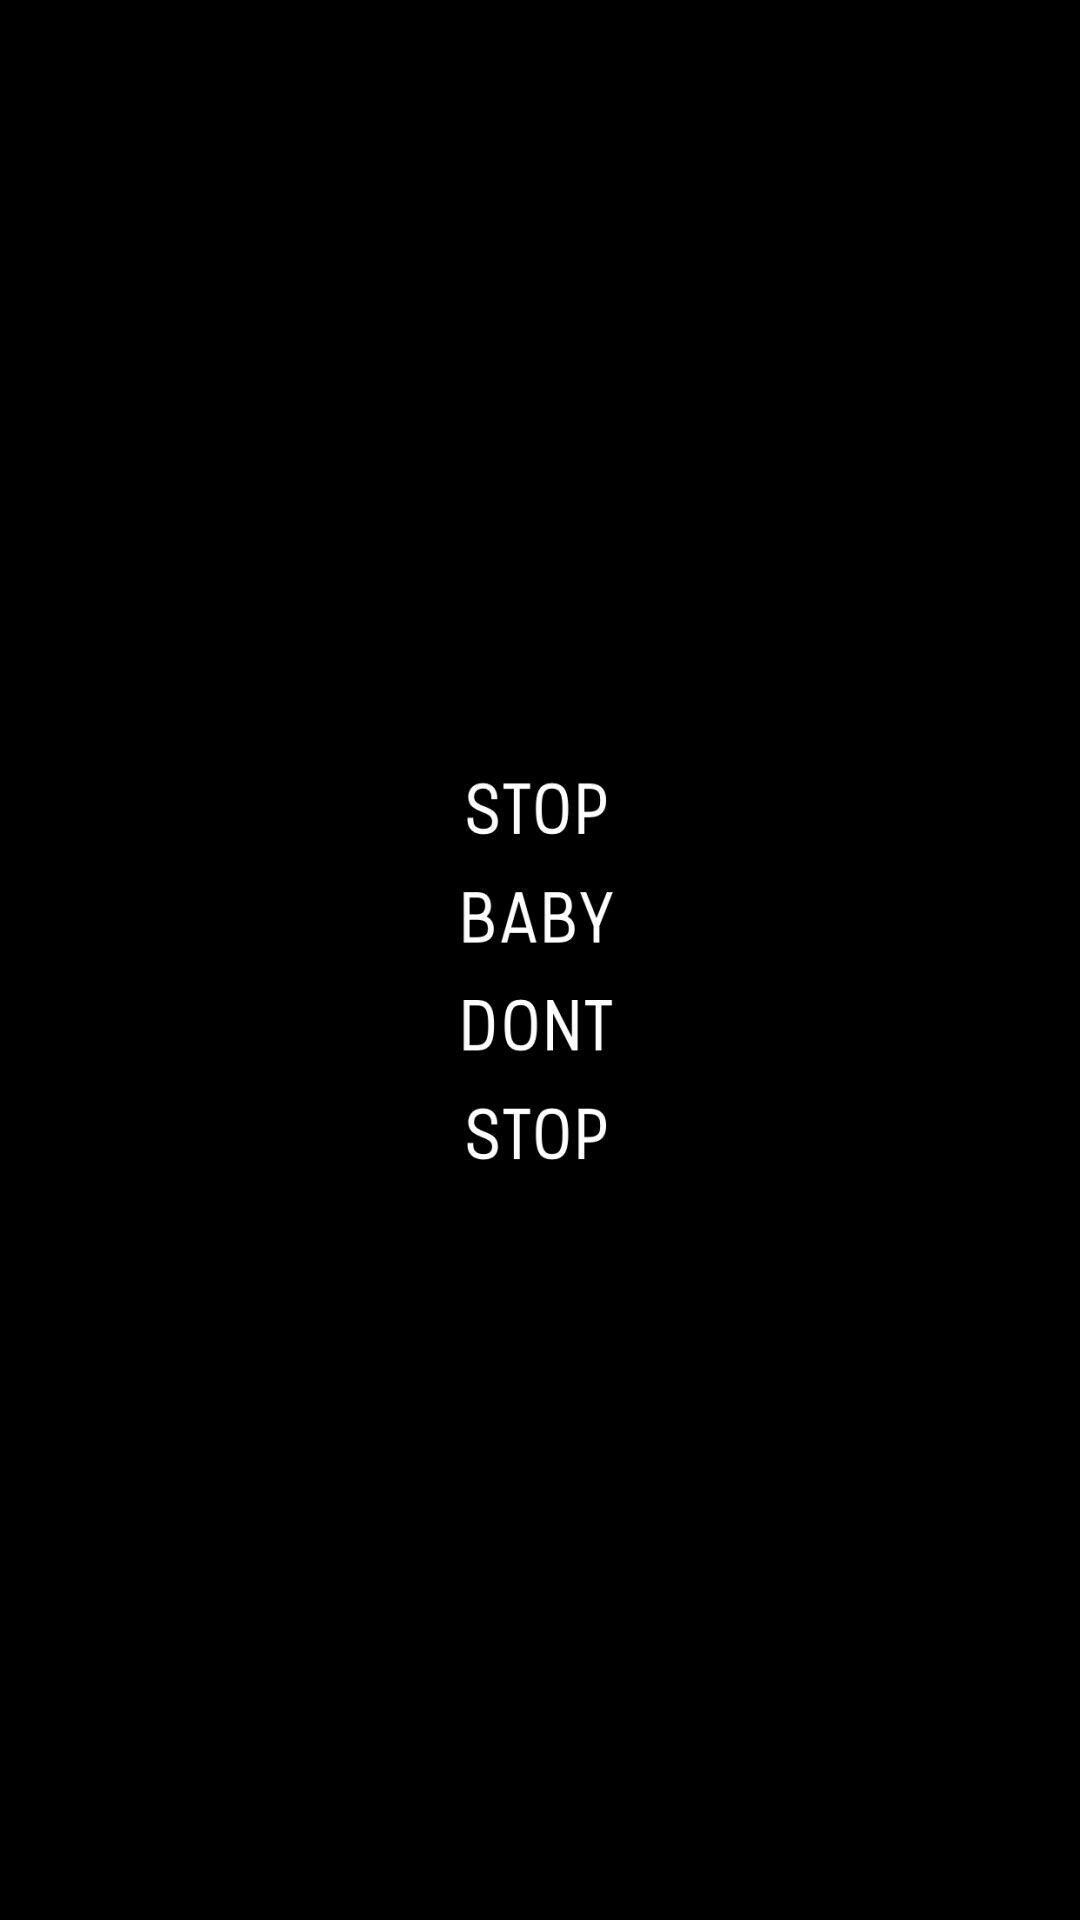 NCT ♡ WALLPAPER - Stop, Baby don't stop